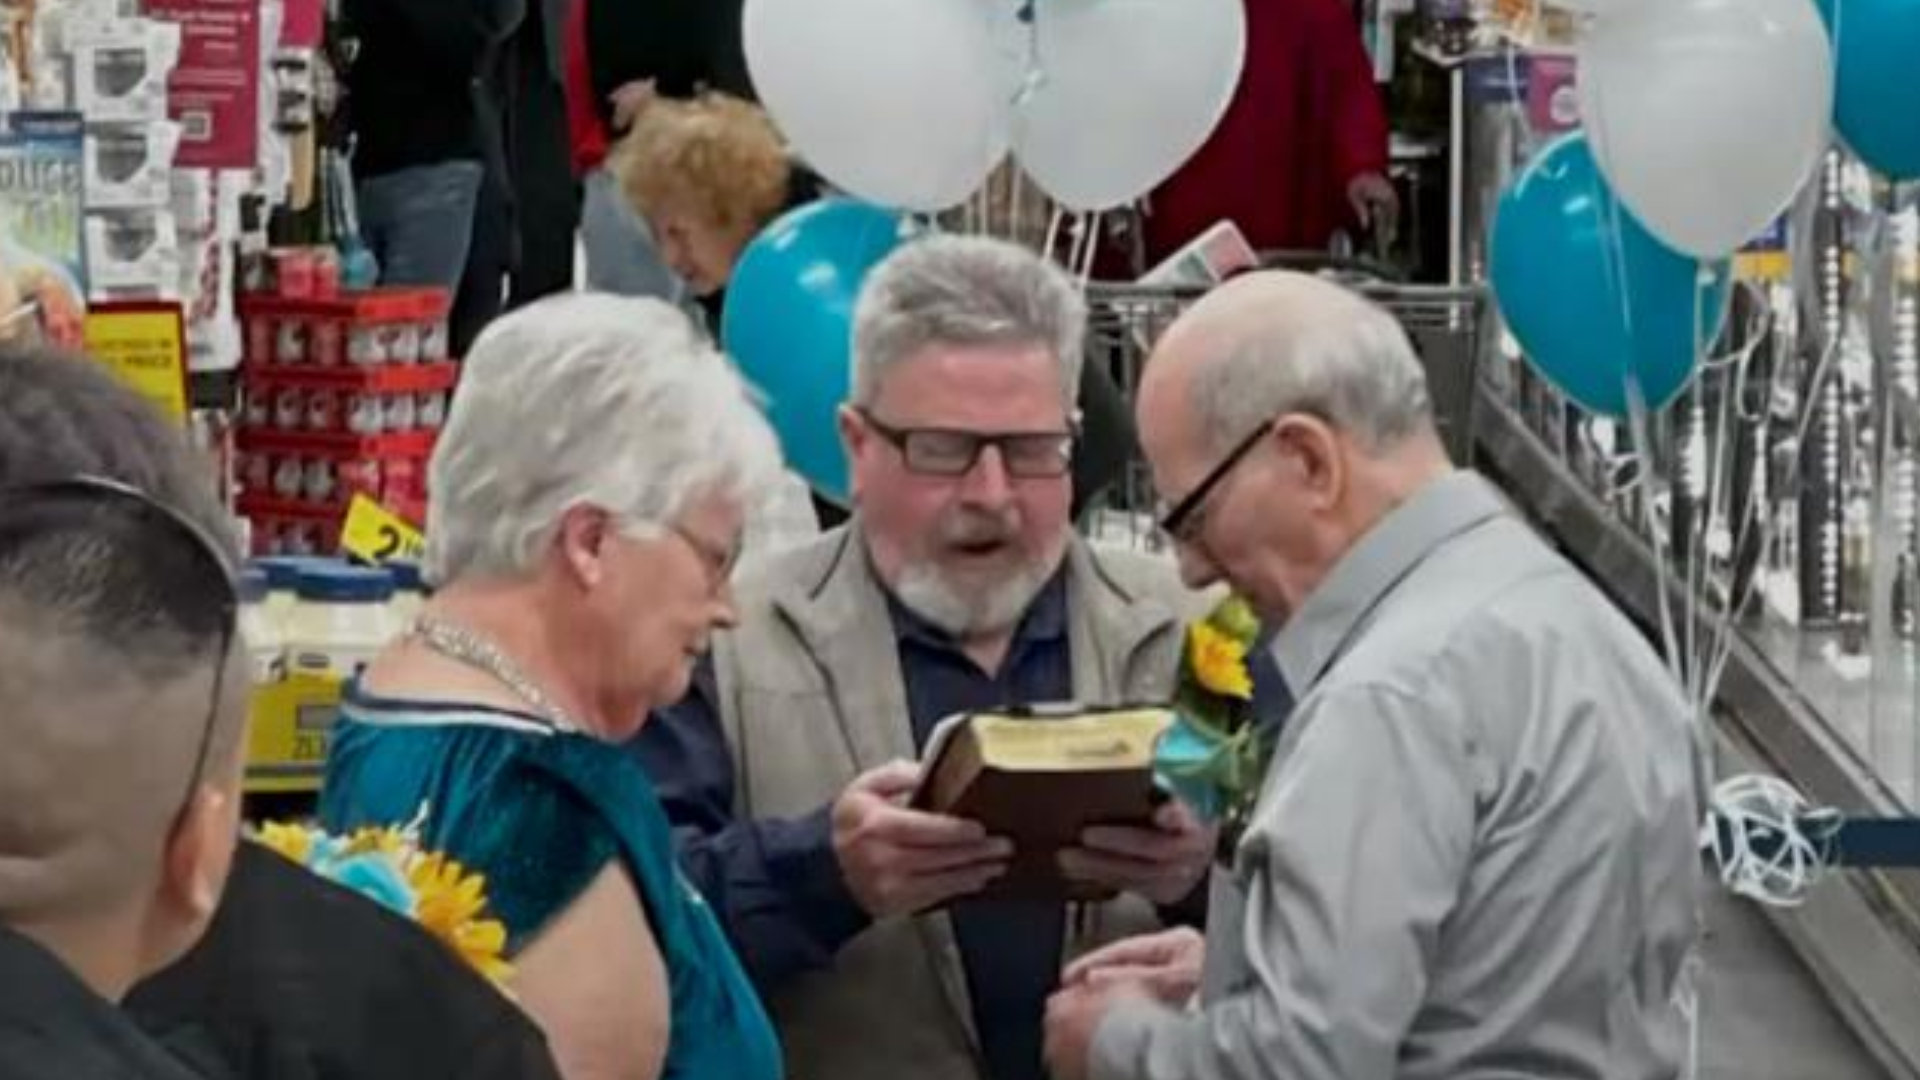 Elderly couple gets married in grocery store aisle where they met